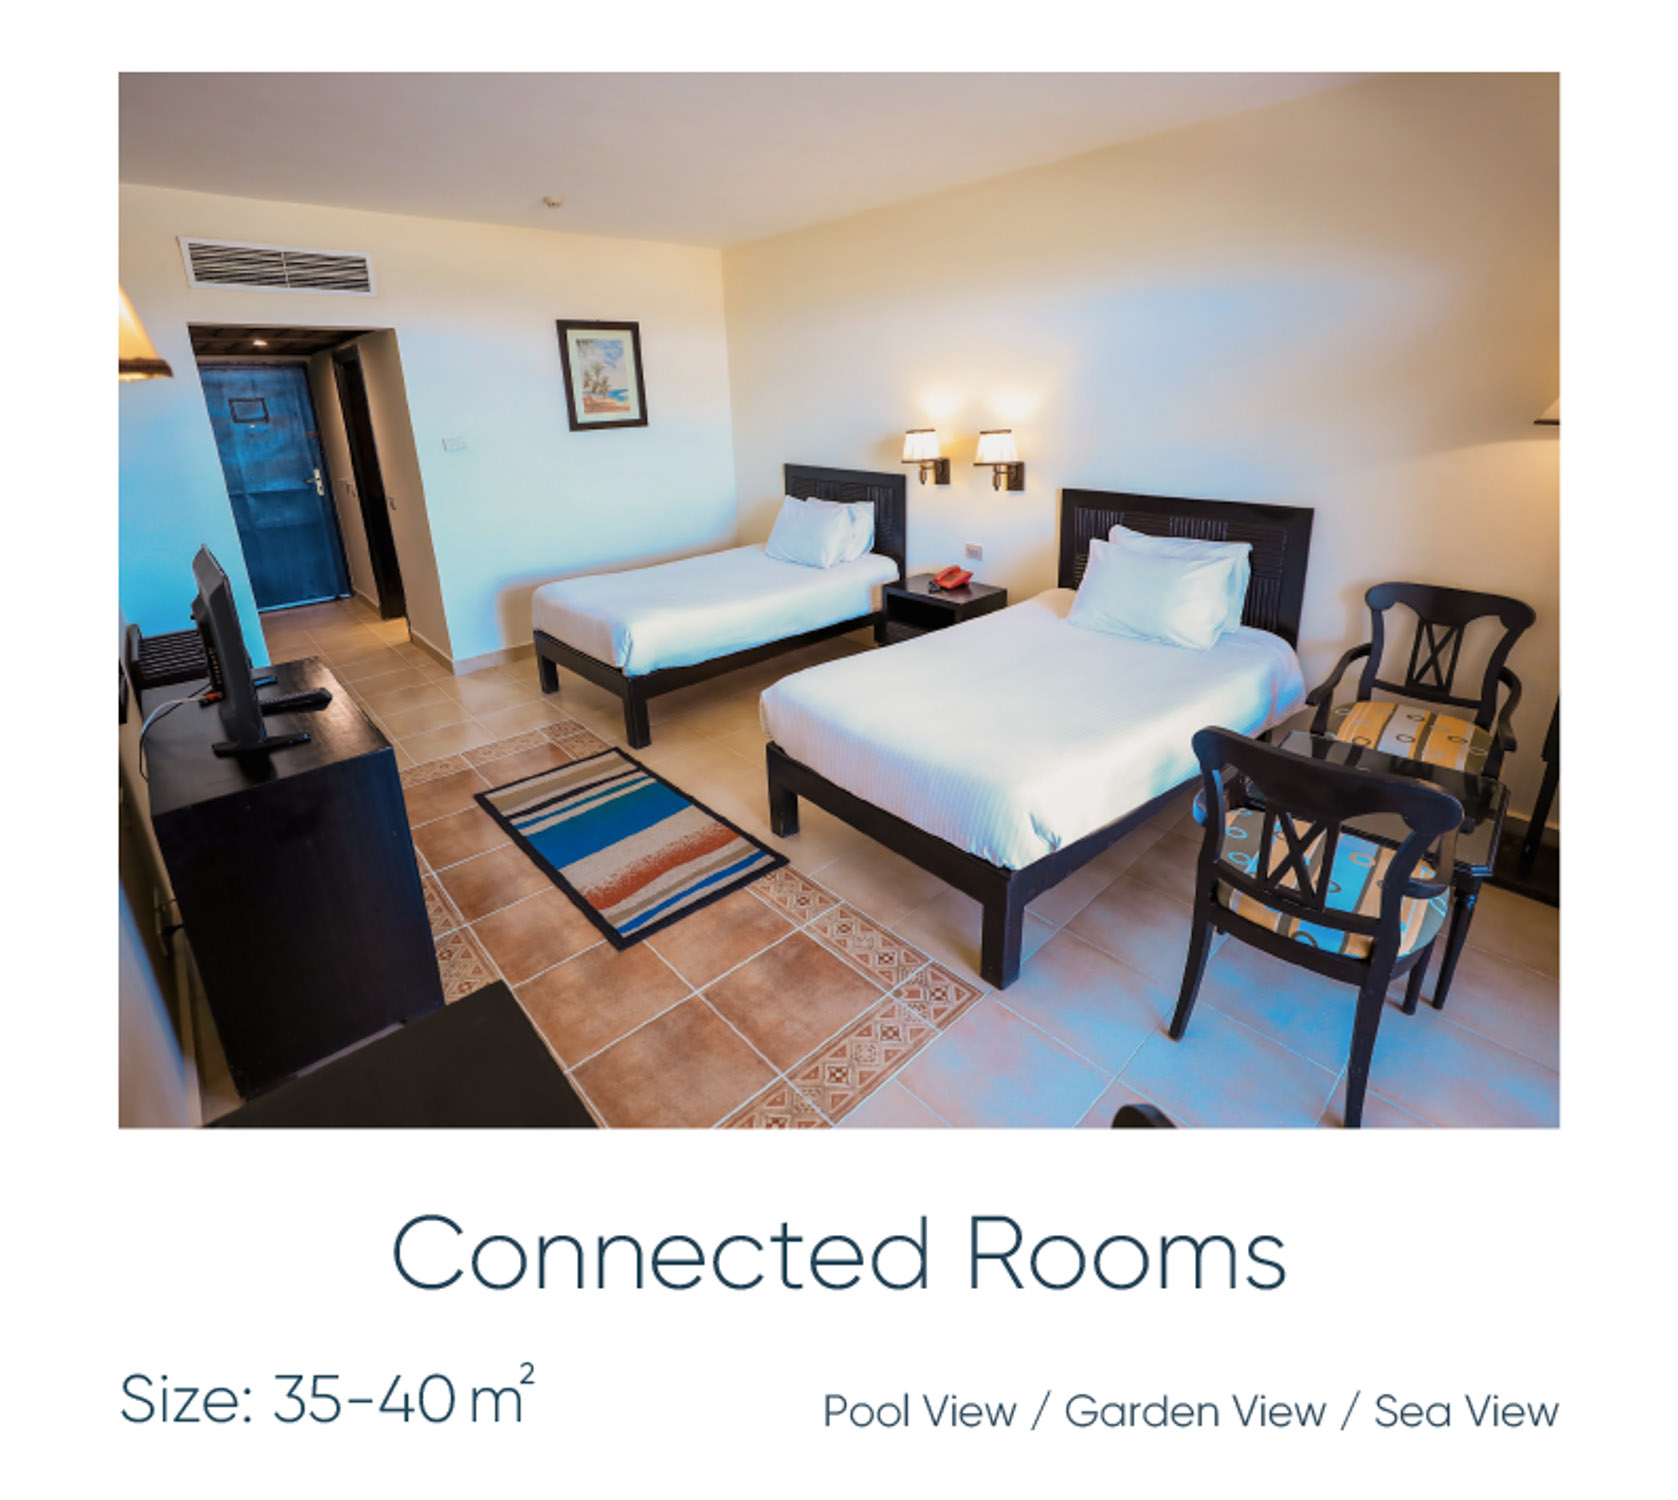 Discover-rooms-connected